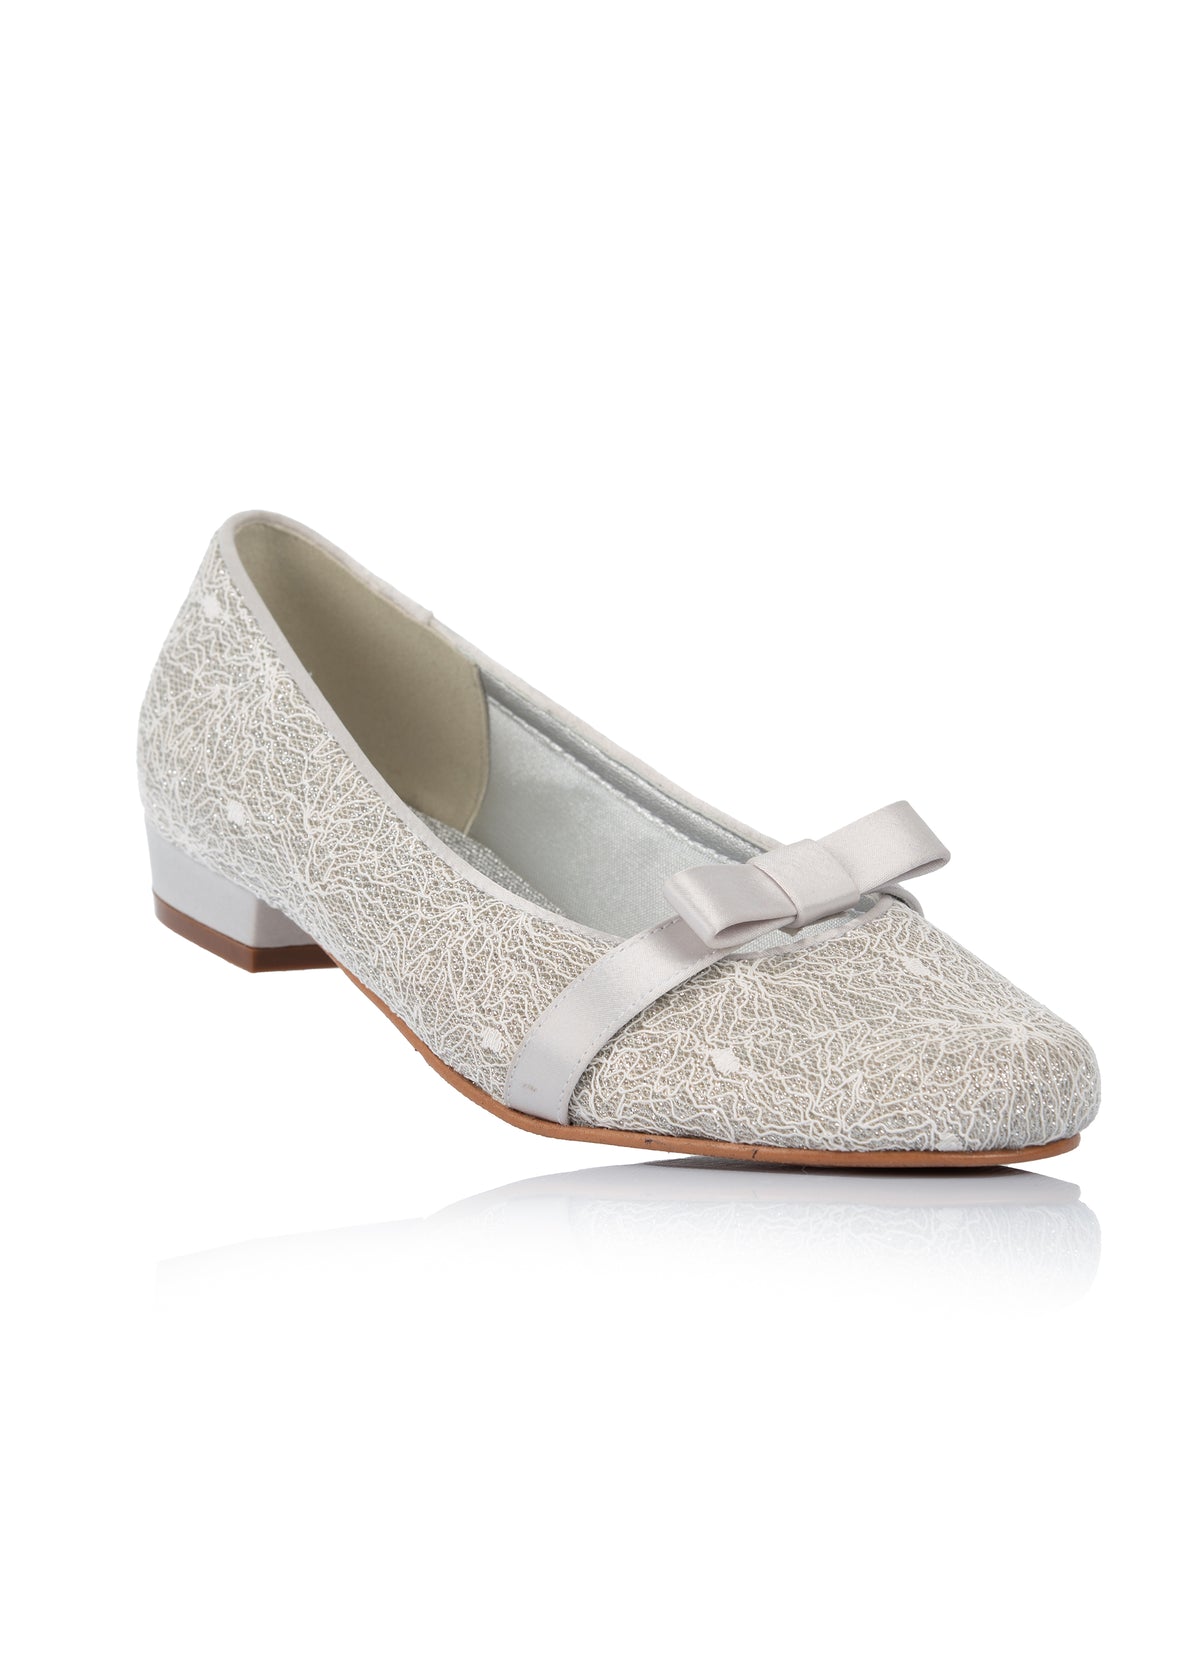 Open toe shoes with a low heel - silver-colored glittering lace fabric, bow decoration